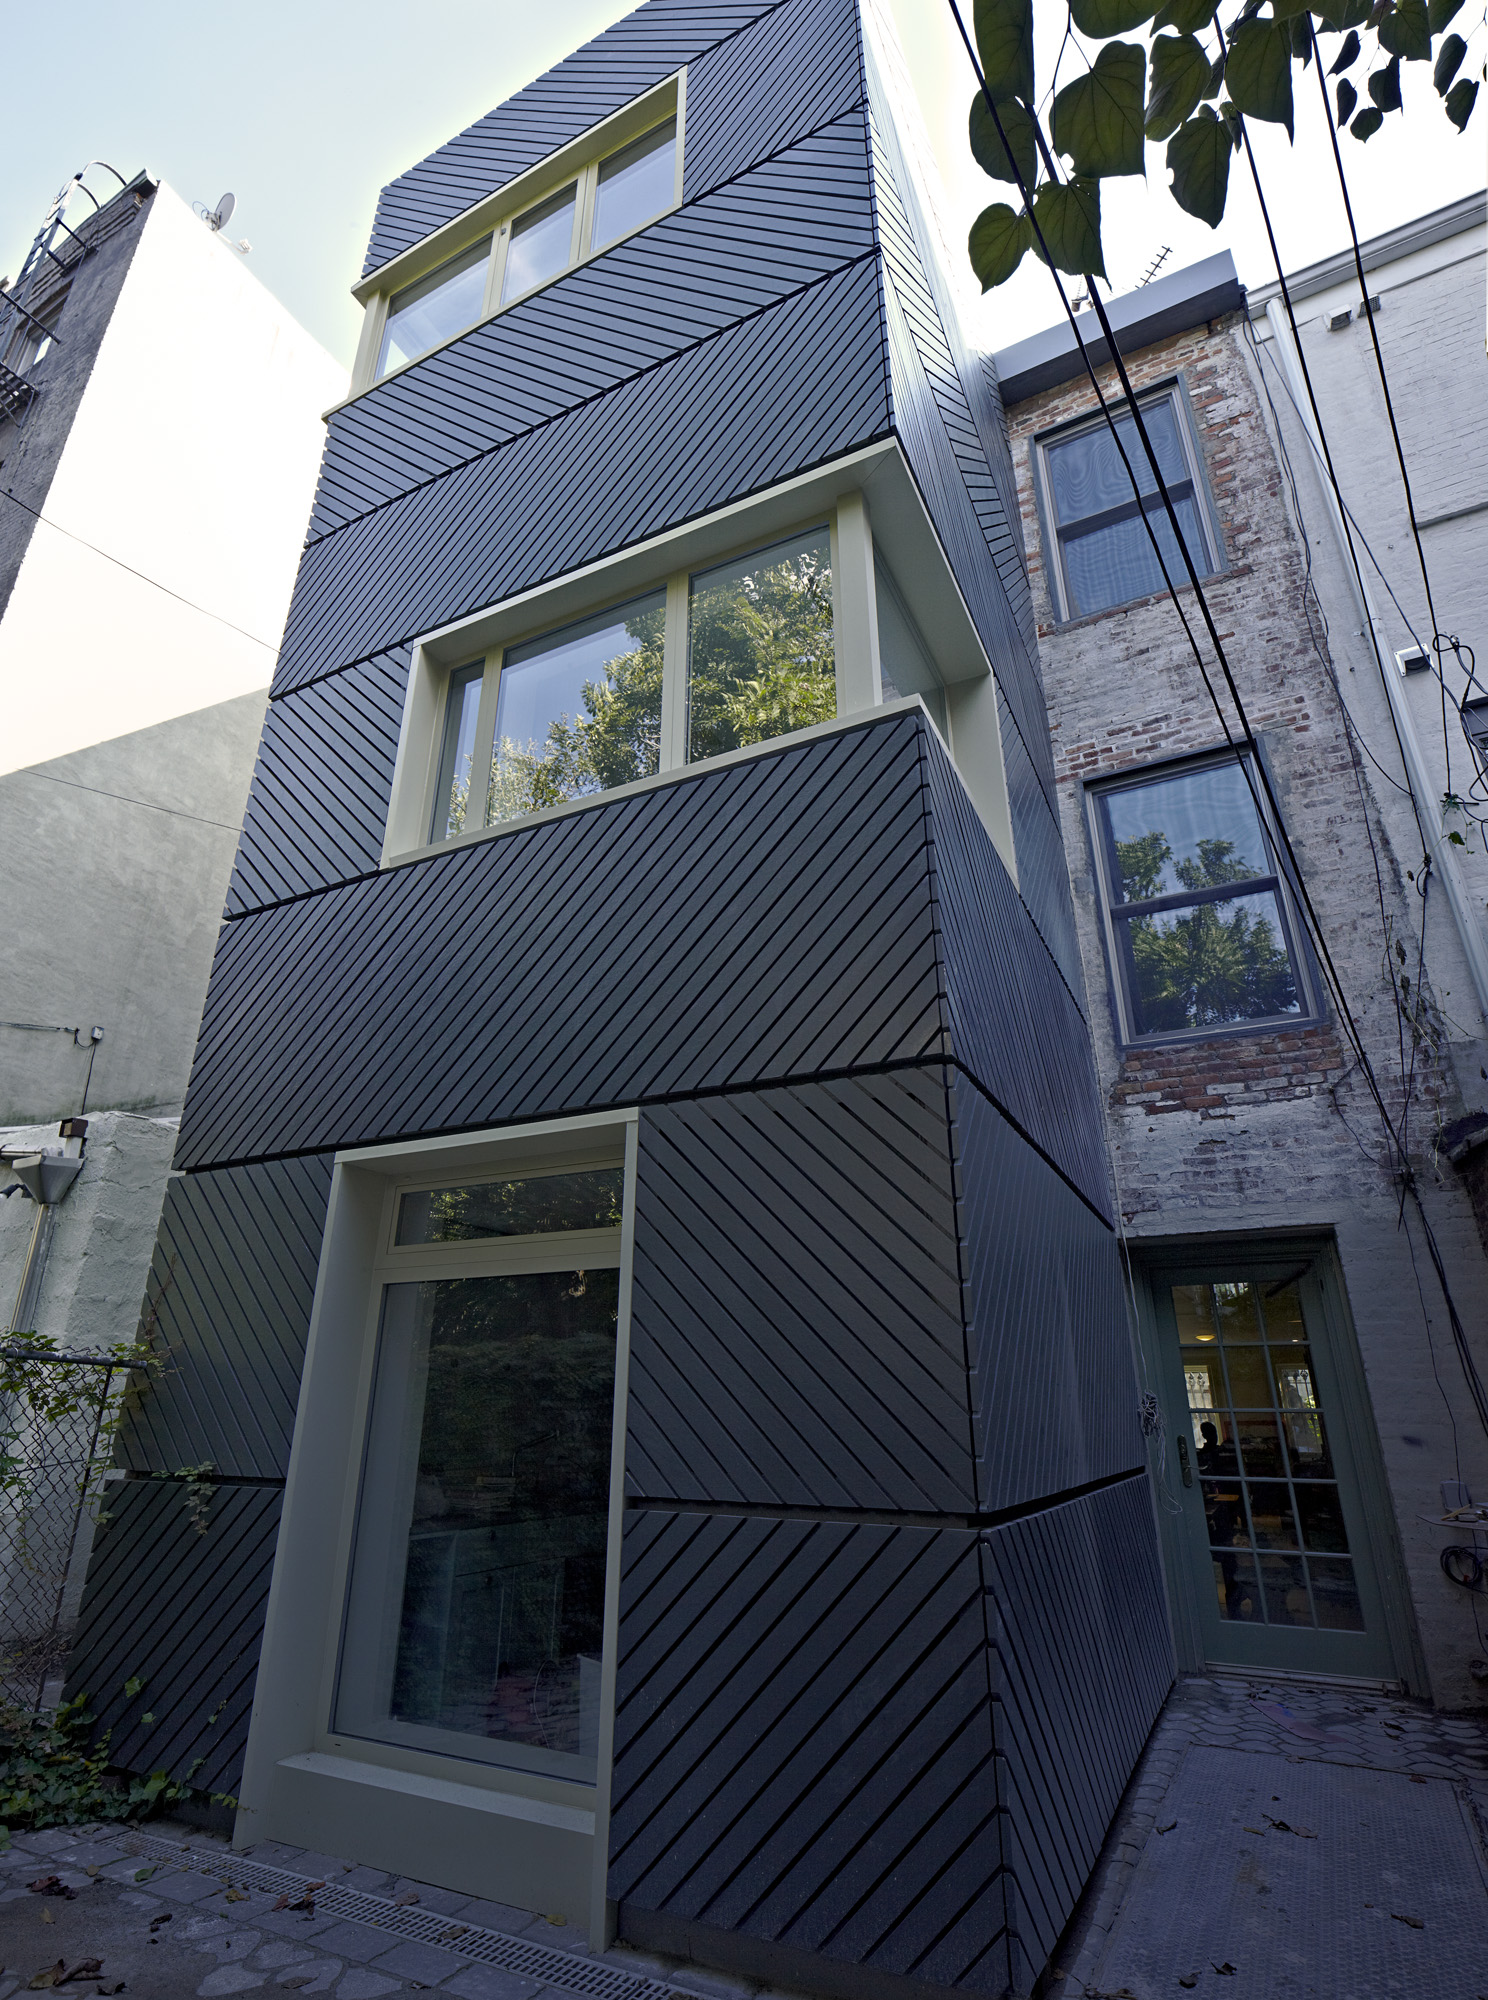 The new addition was clad in a herringbone hardiboard pattern.